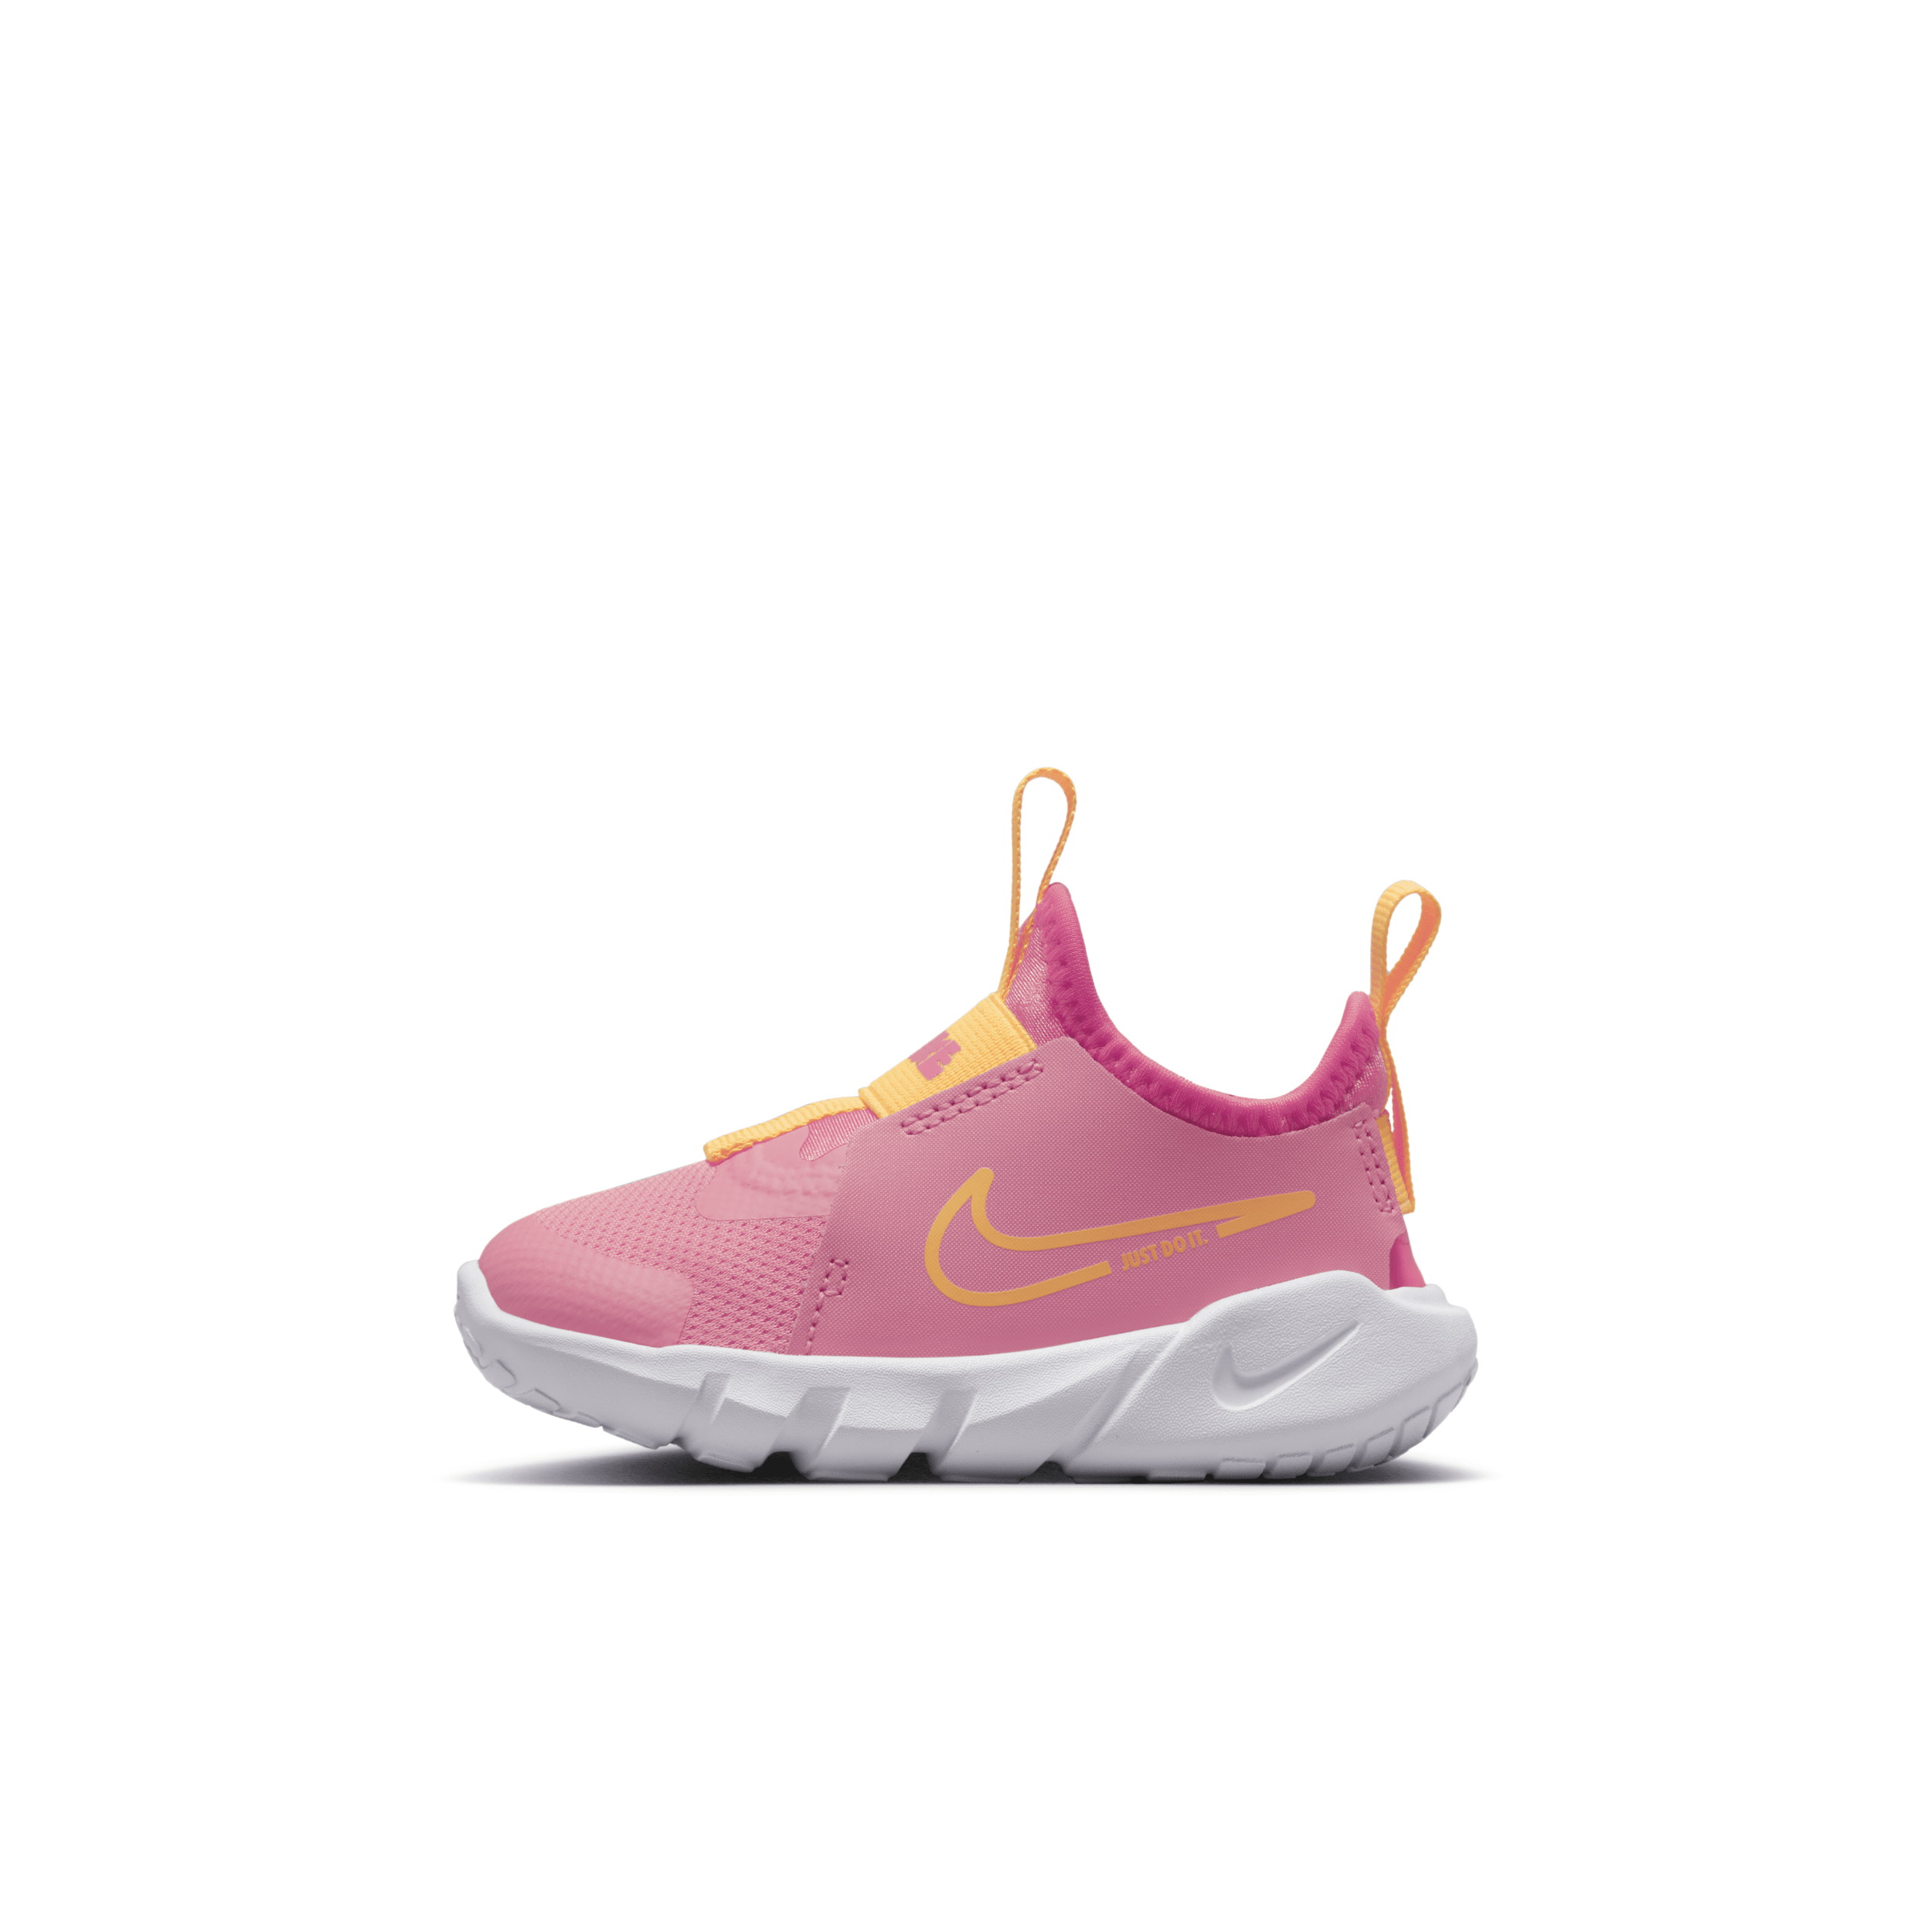 Nike Flex Runner 2 Baby/toddler Shoes In Pink